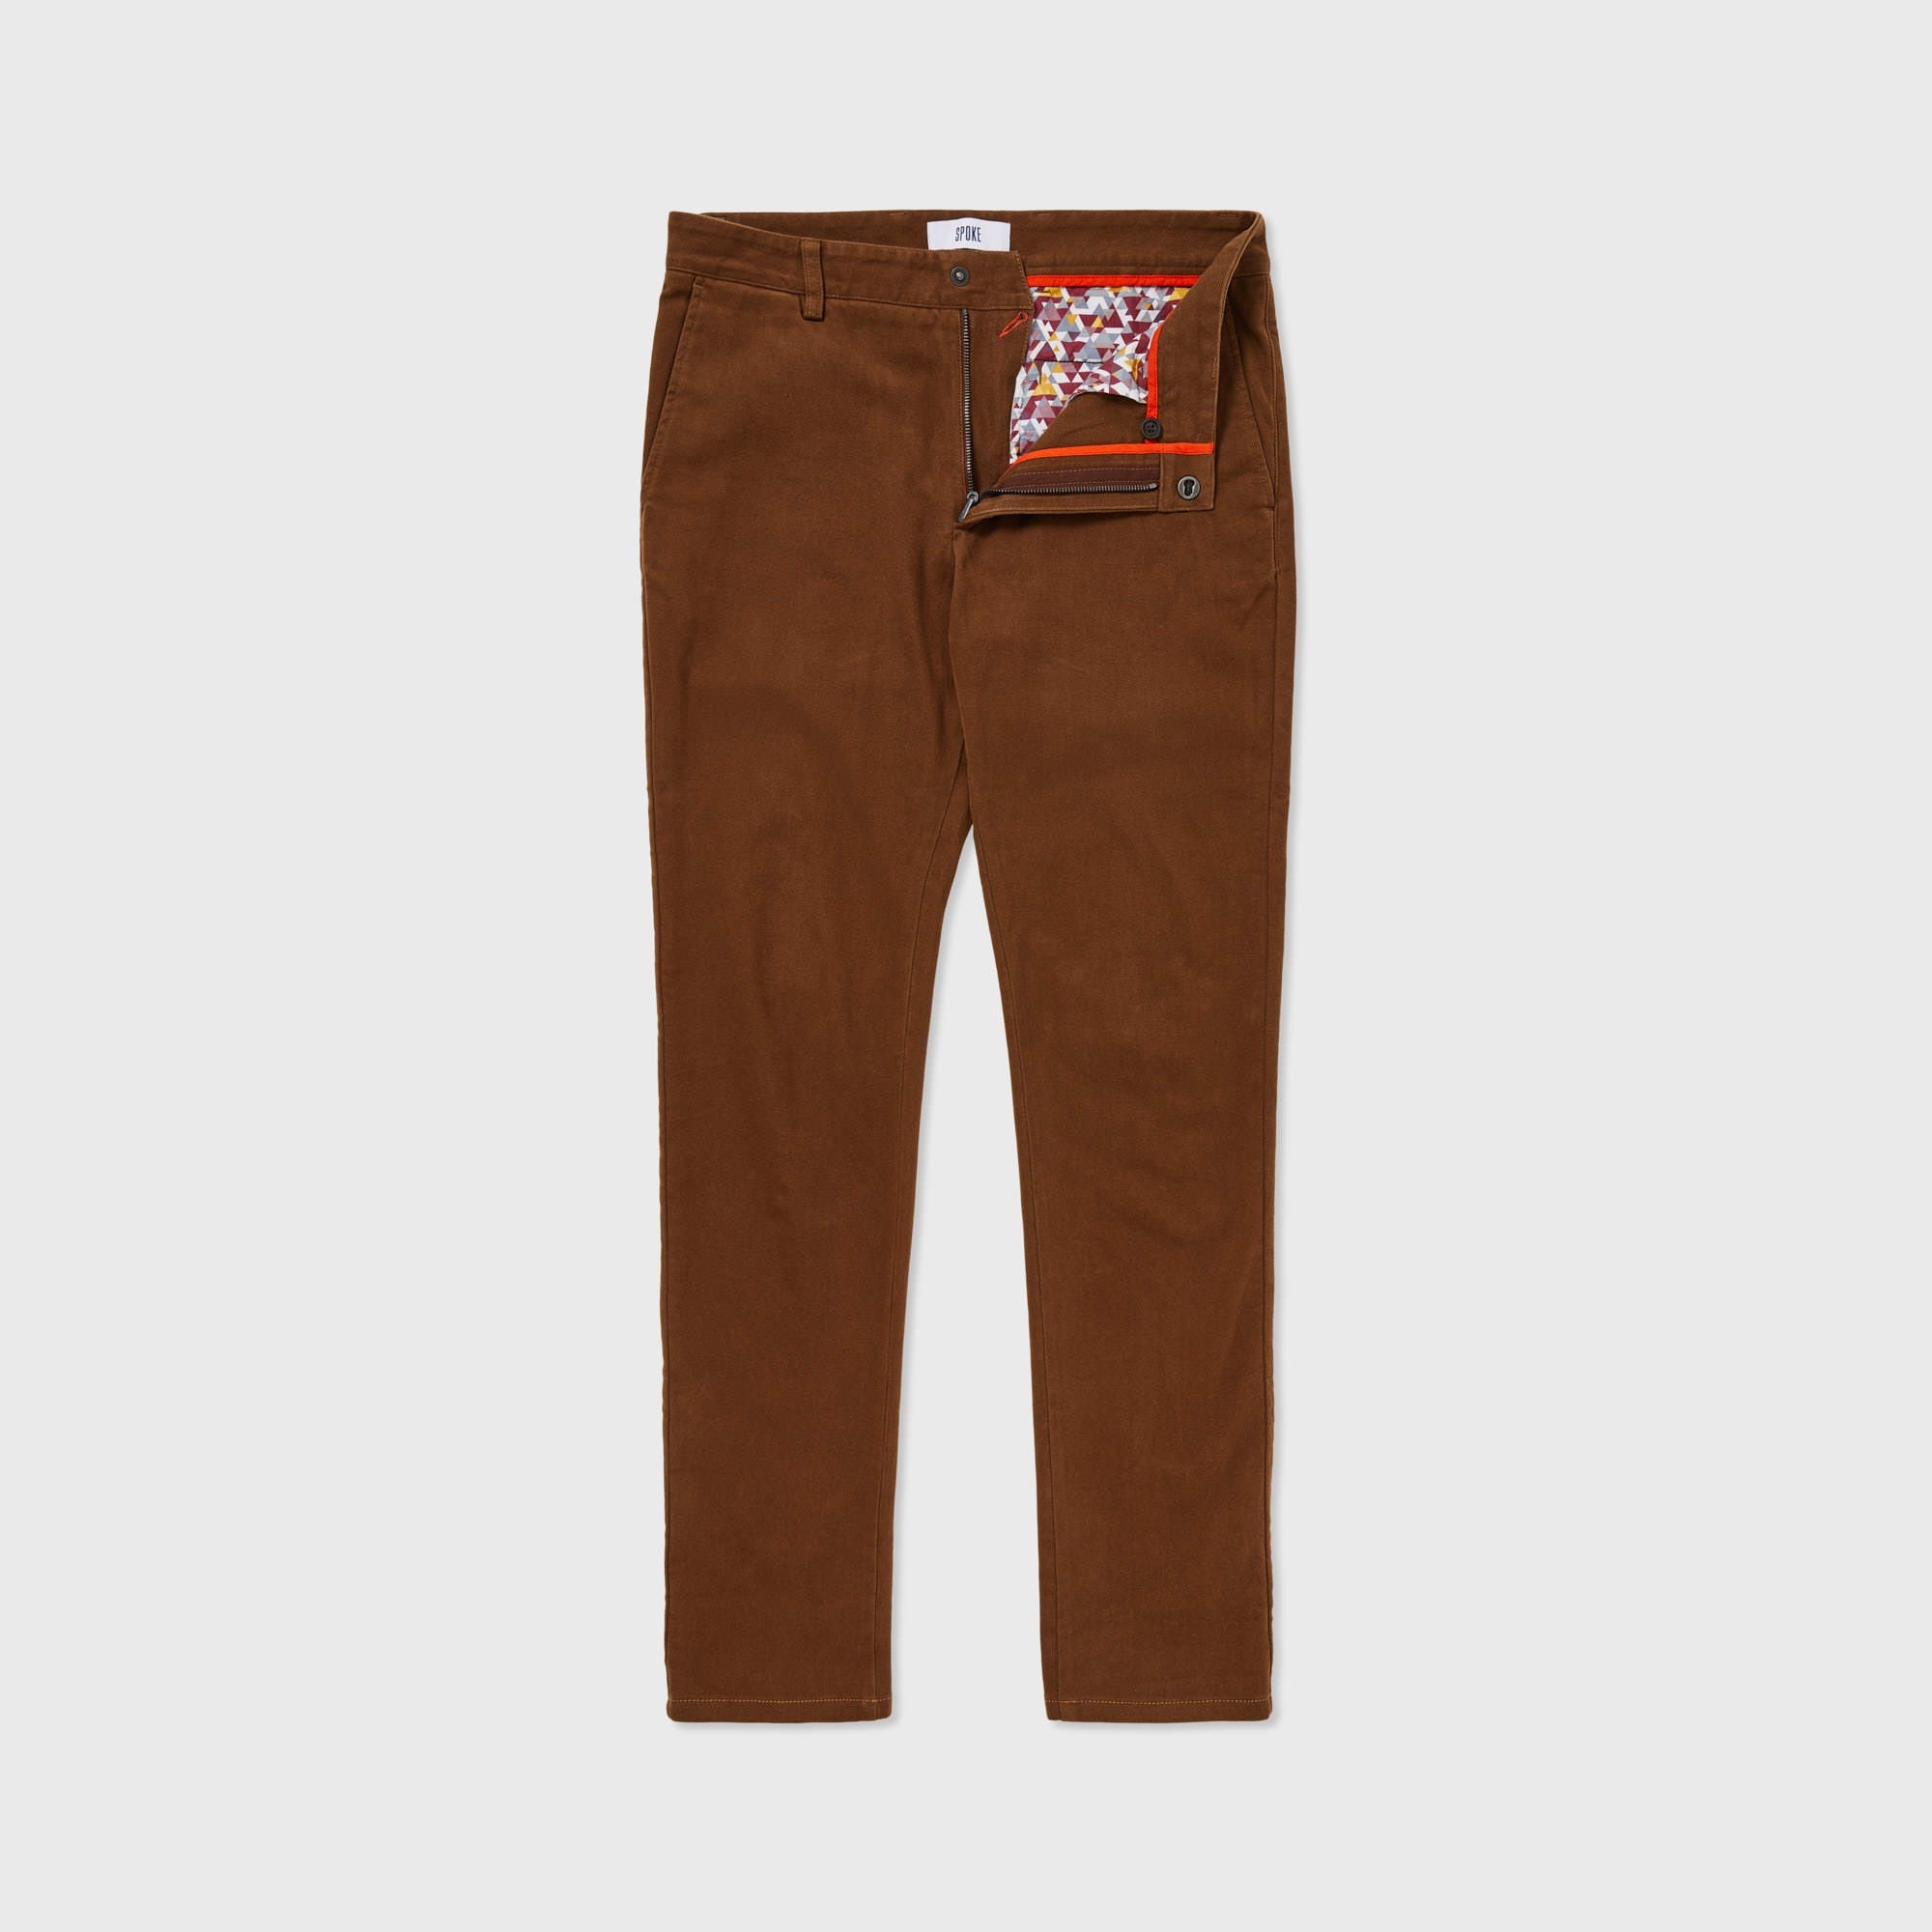 Men's Warm Winter Trousers and Chinos